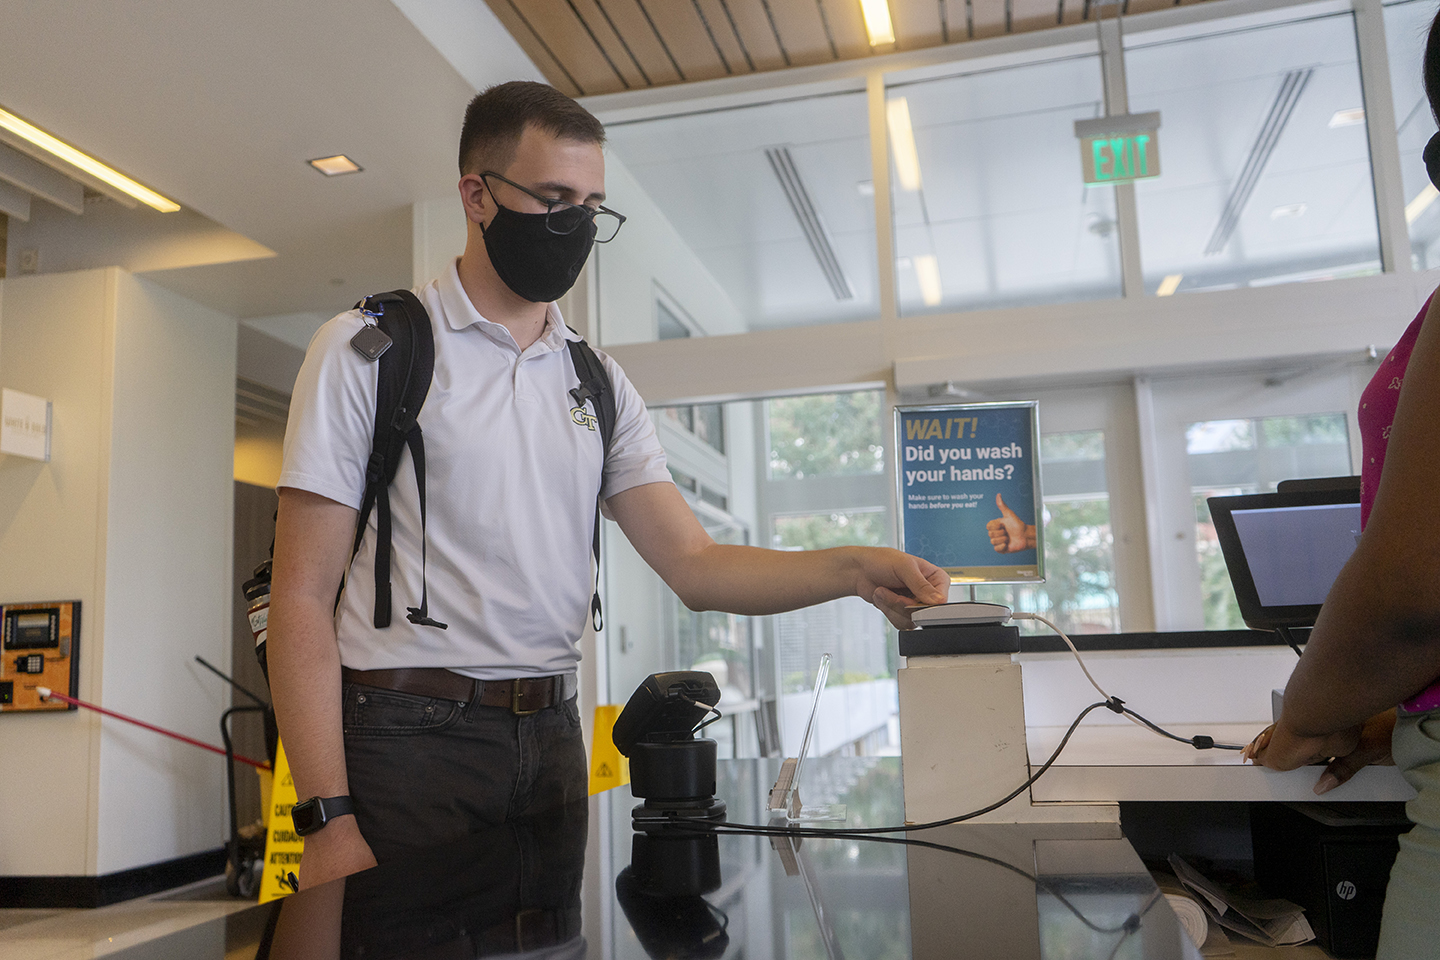 Student wearing a mask entering a dining hall